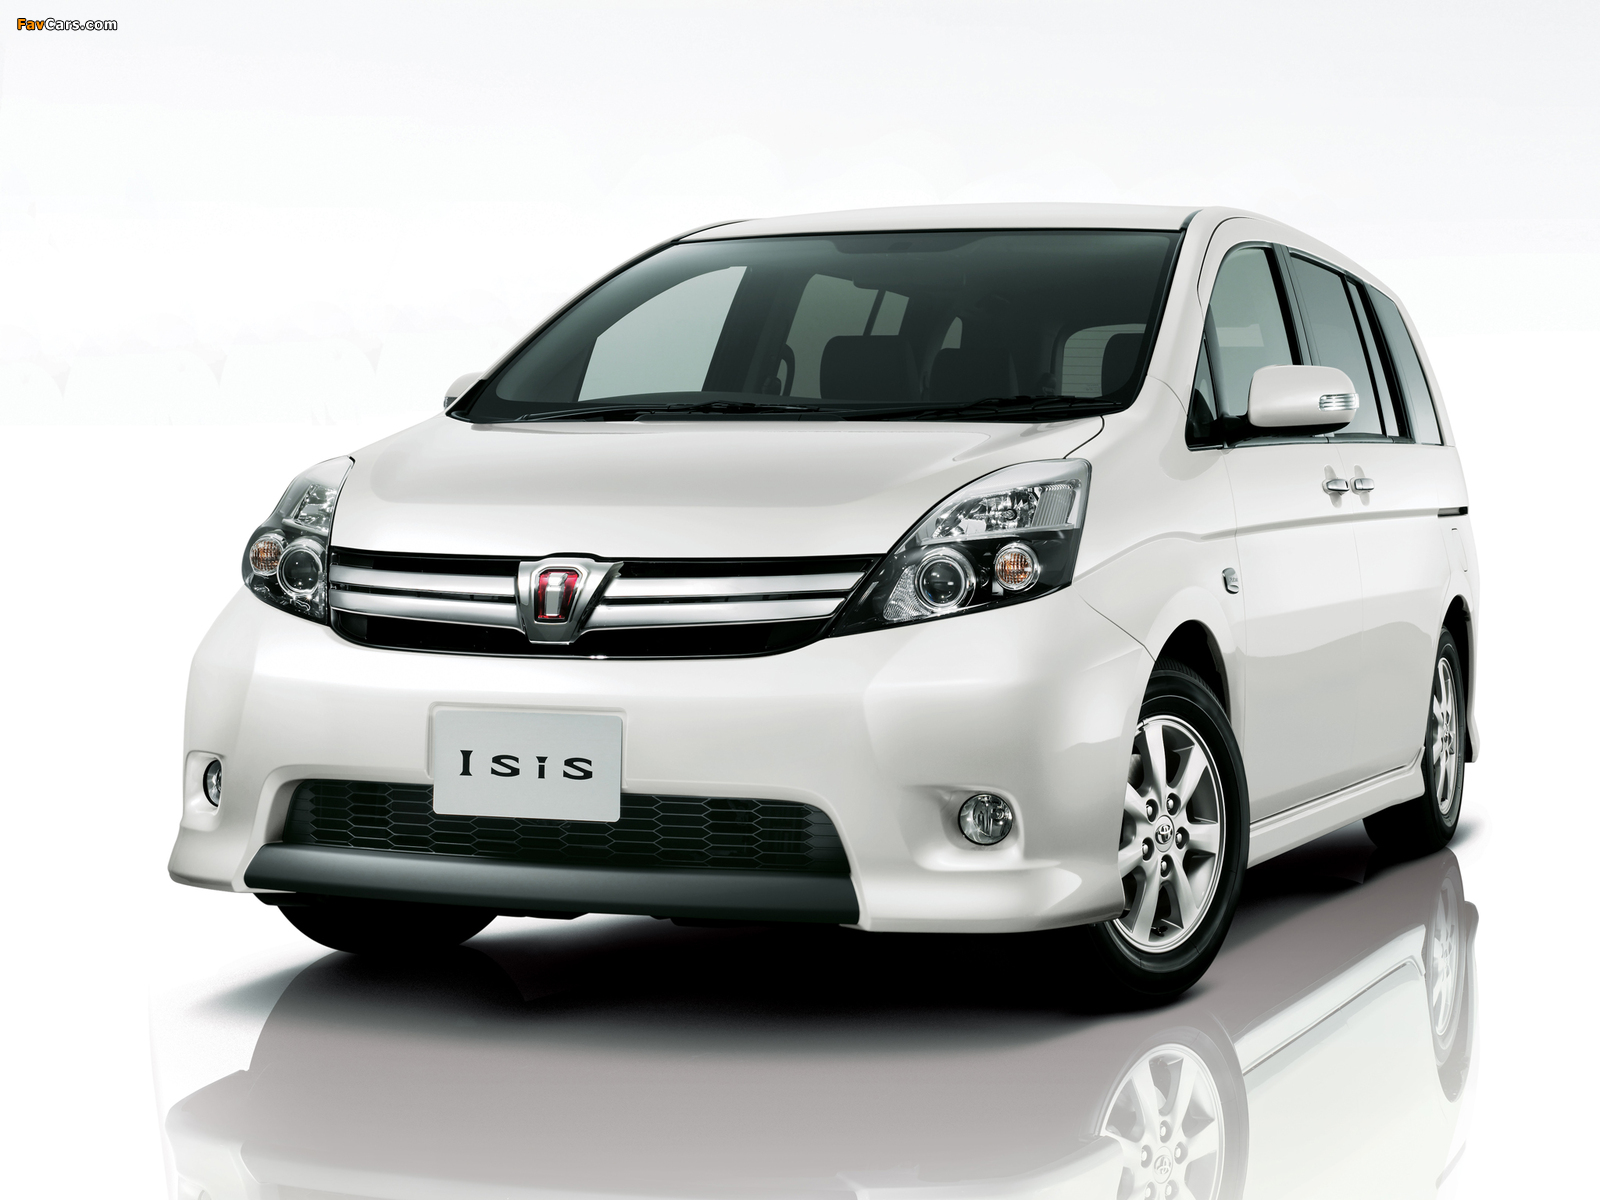 Toyota Isis Platana V Selection White Package 2011 photos (1600 x 1200)